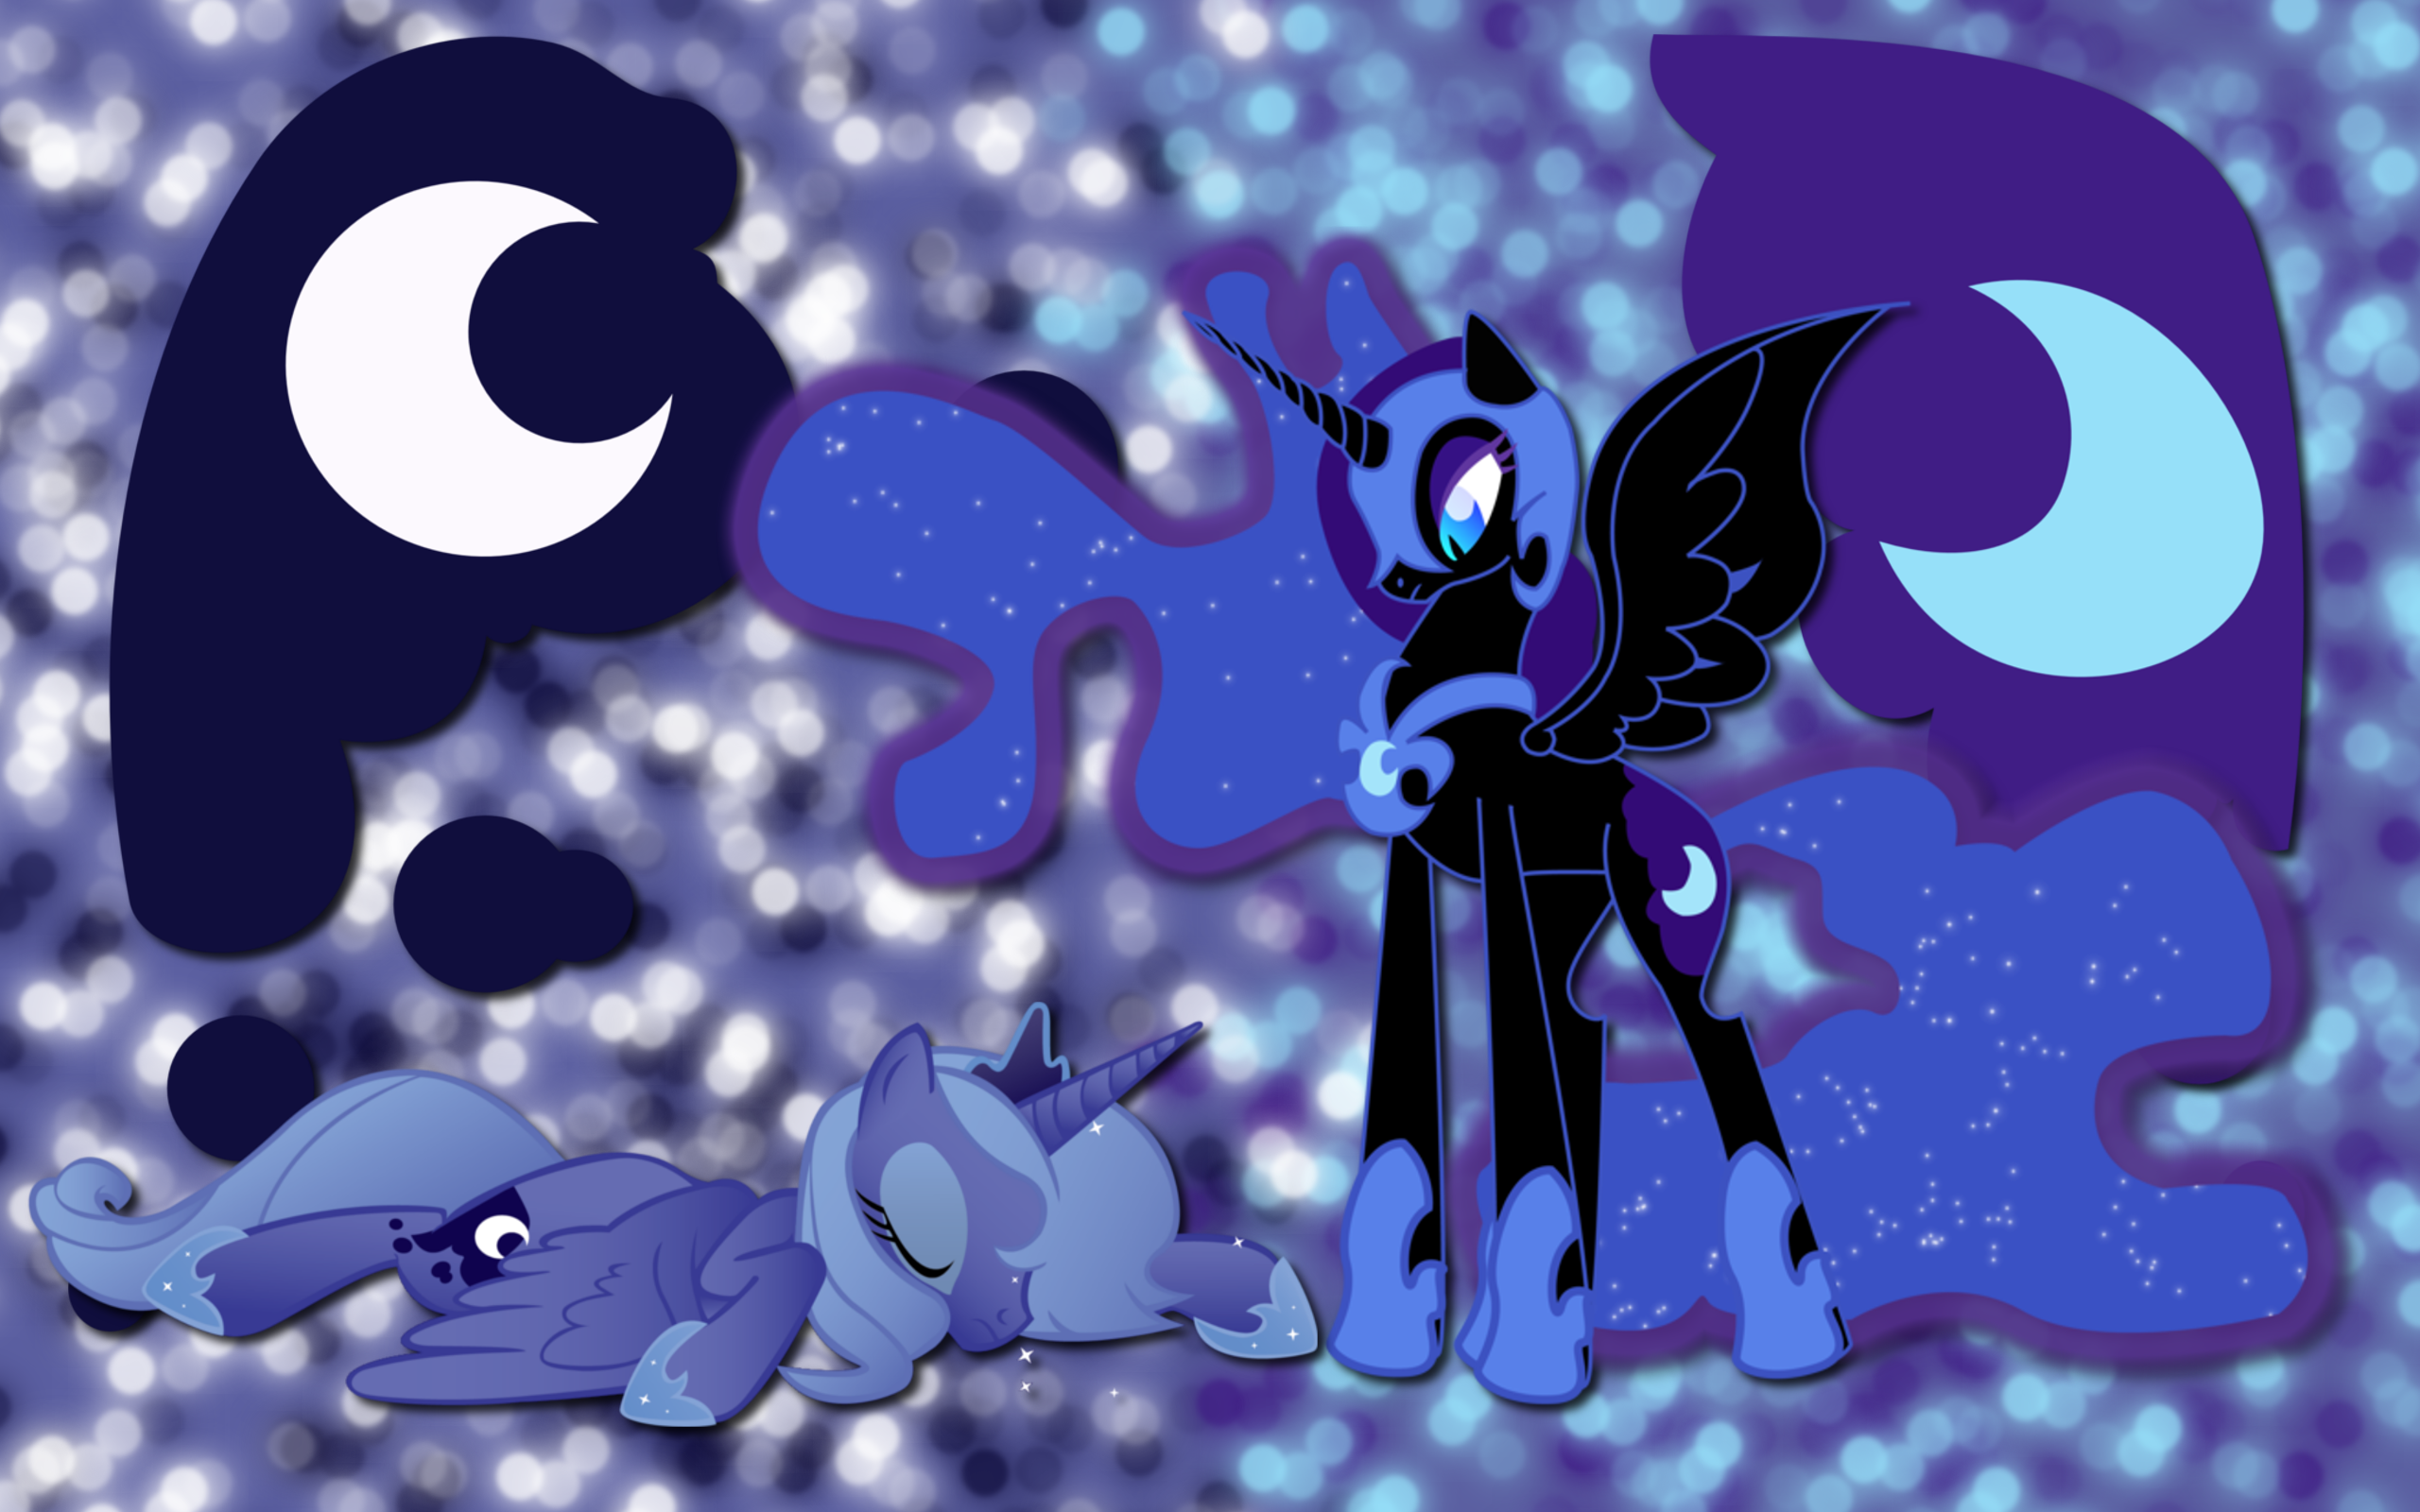 NMM and Luna WP by AliceHumanSacrifice0, MikeTheUser, The-Smiling-Pony and WraithX79